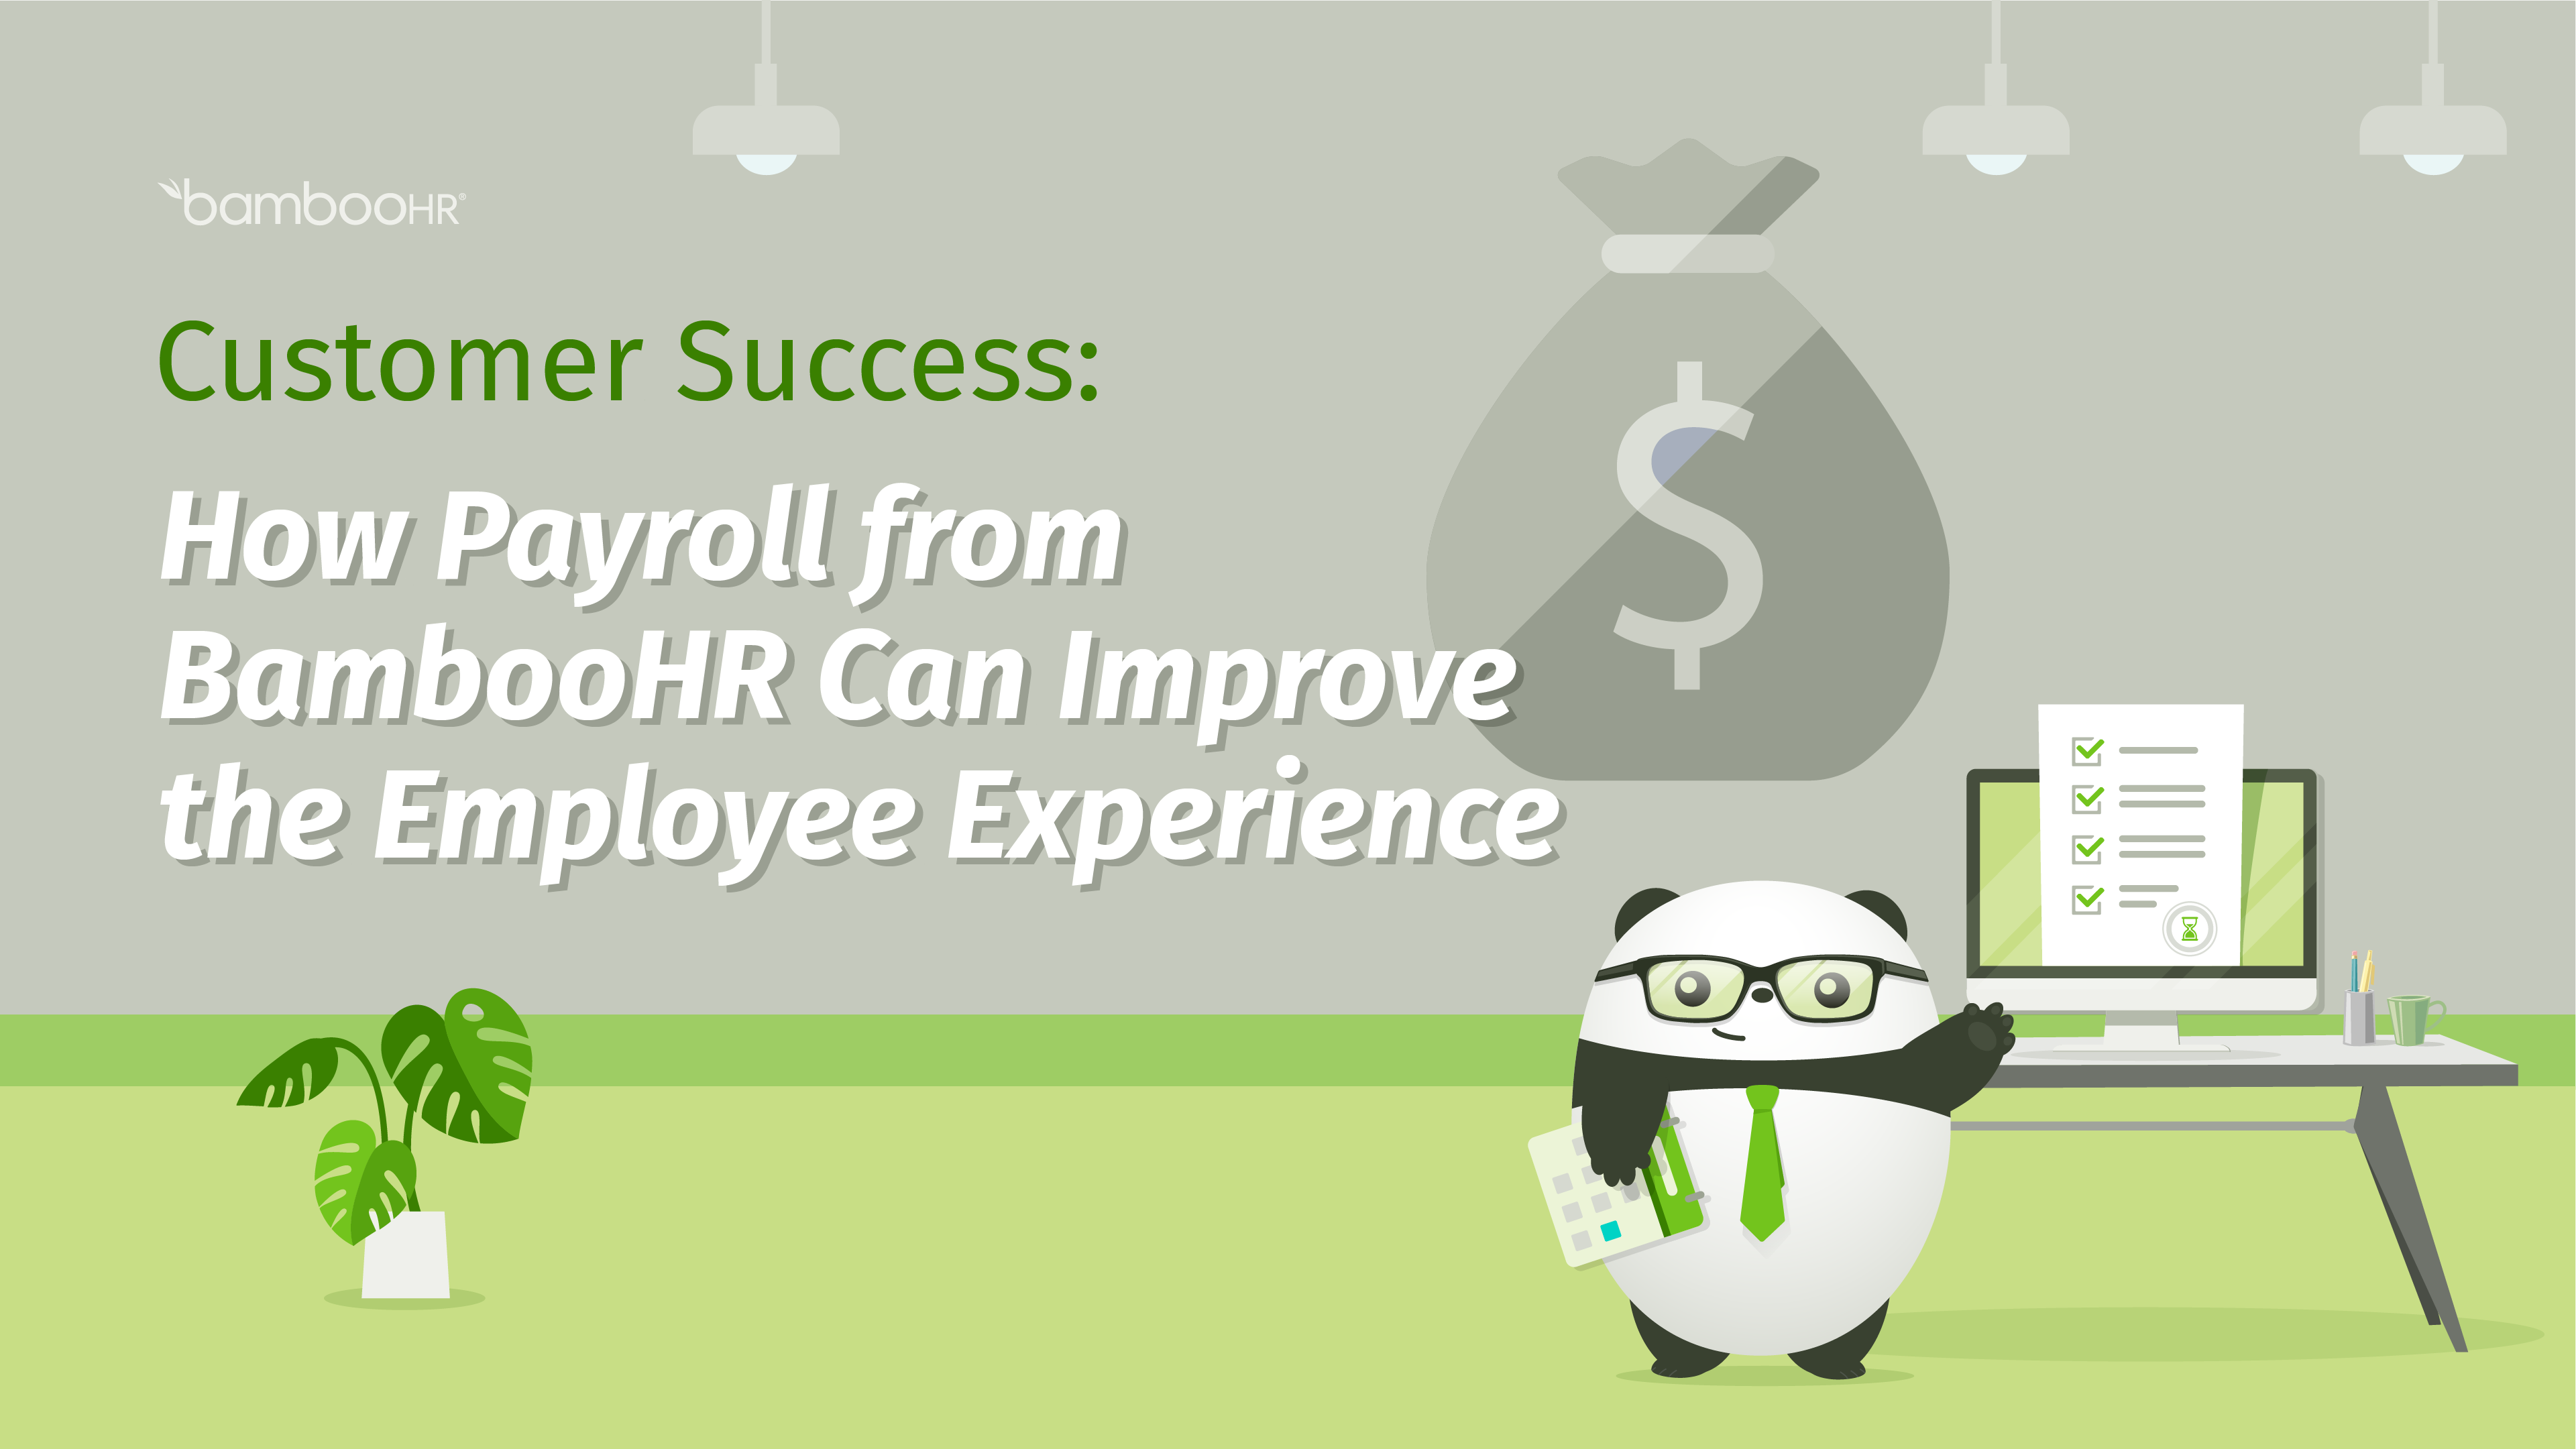 How Payroll from BambooHR Can Improve the Employee Experience